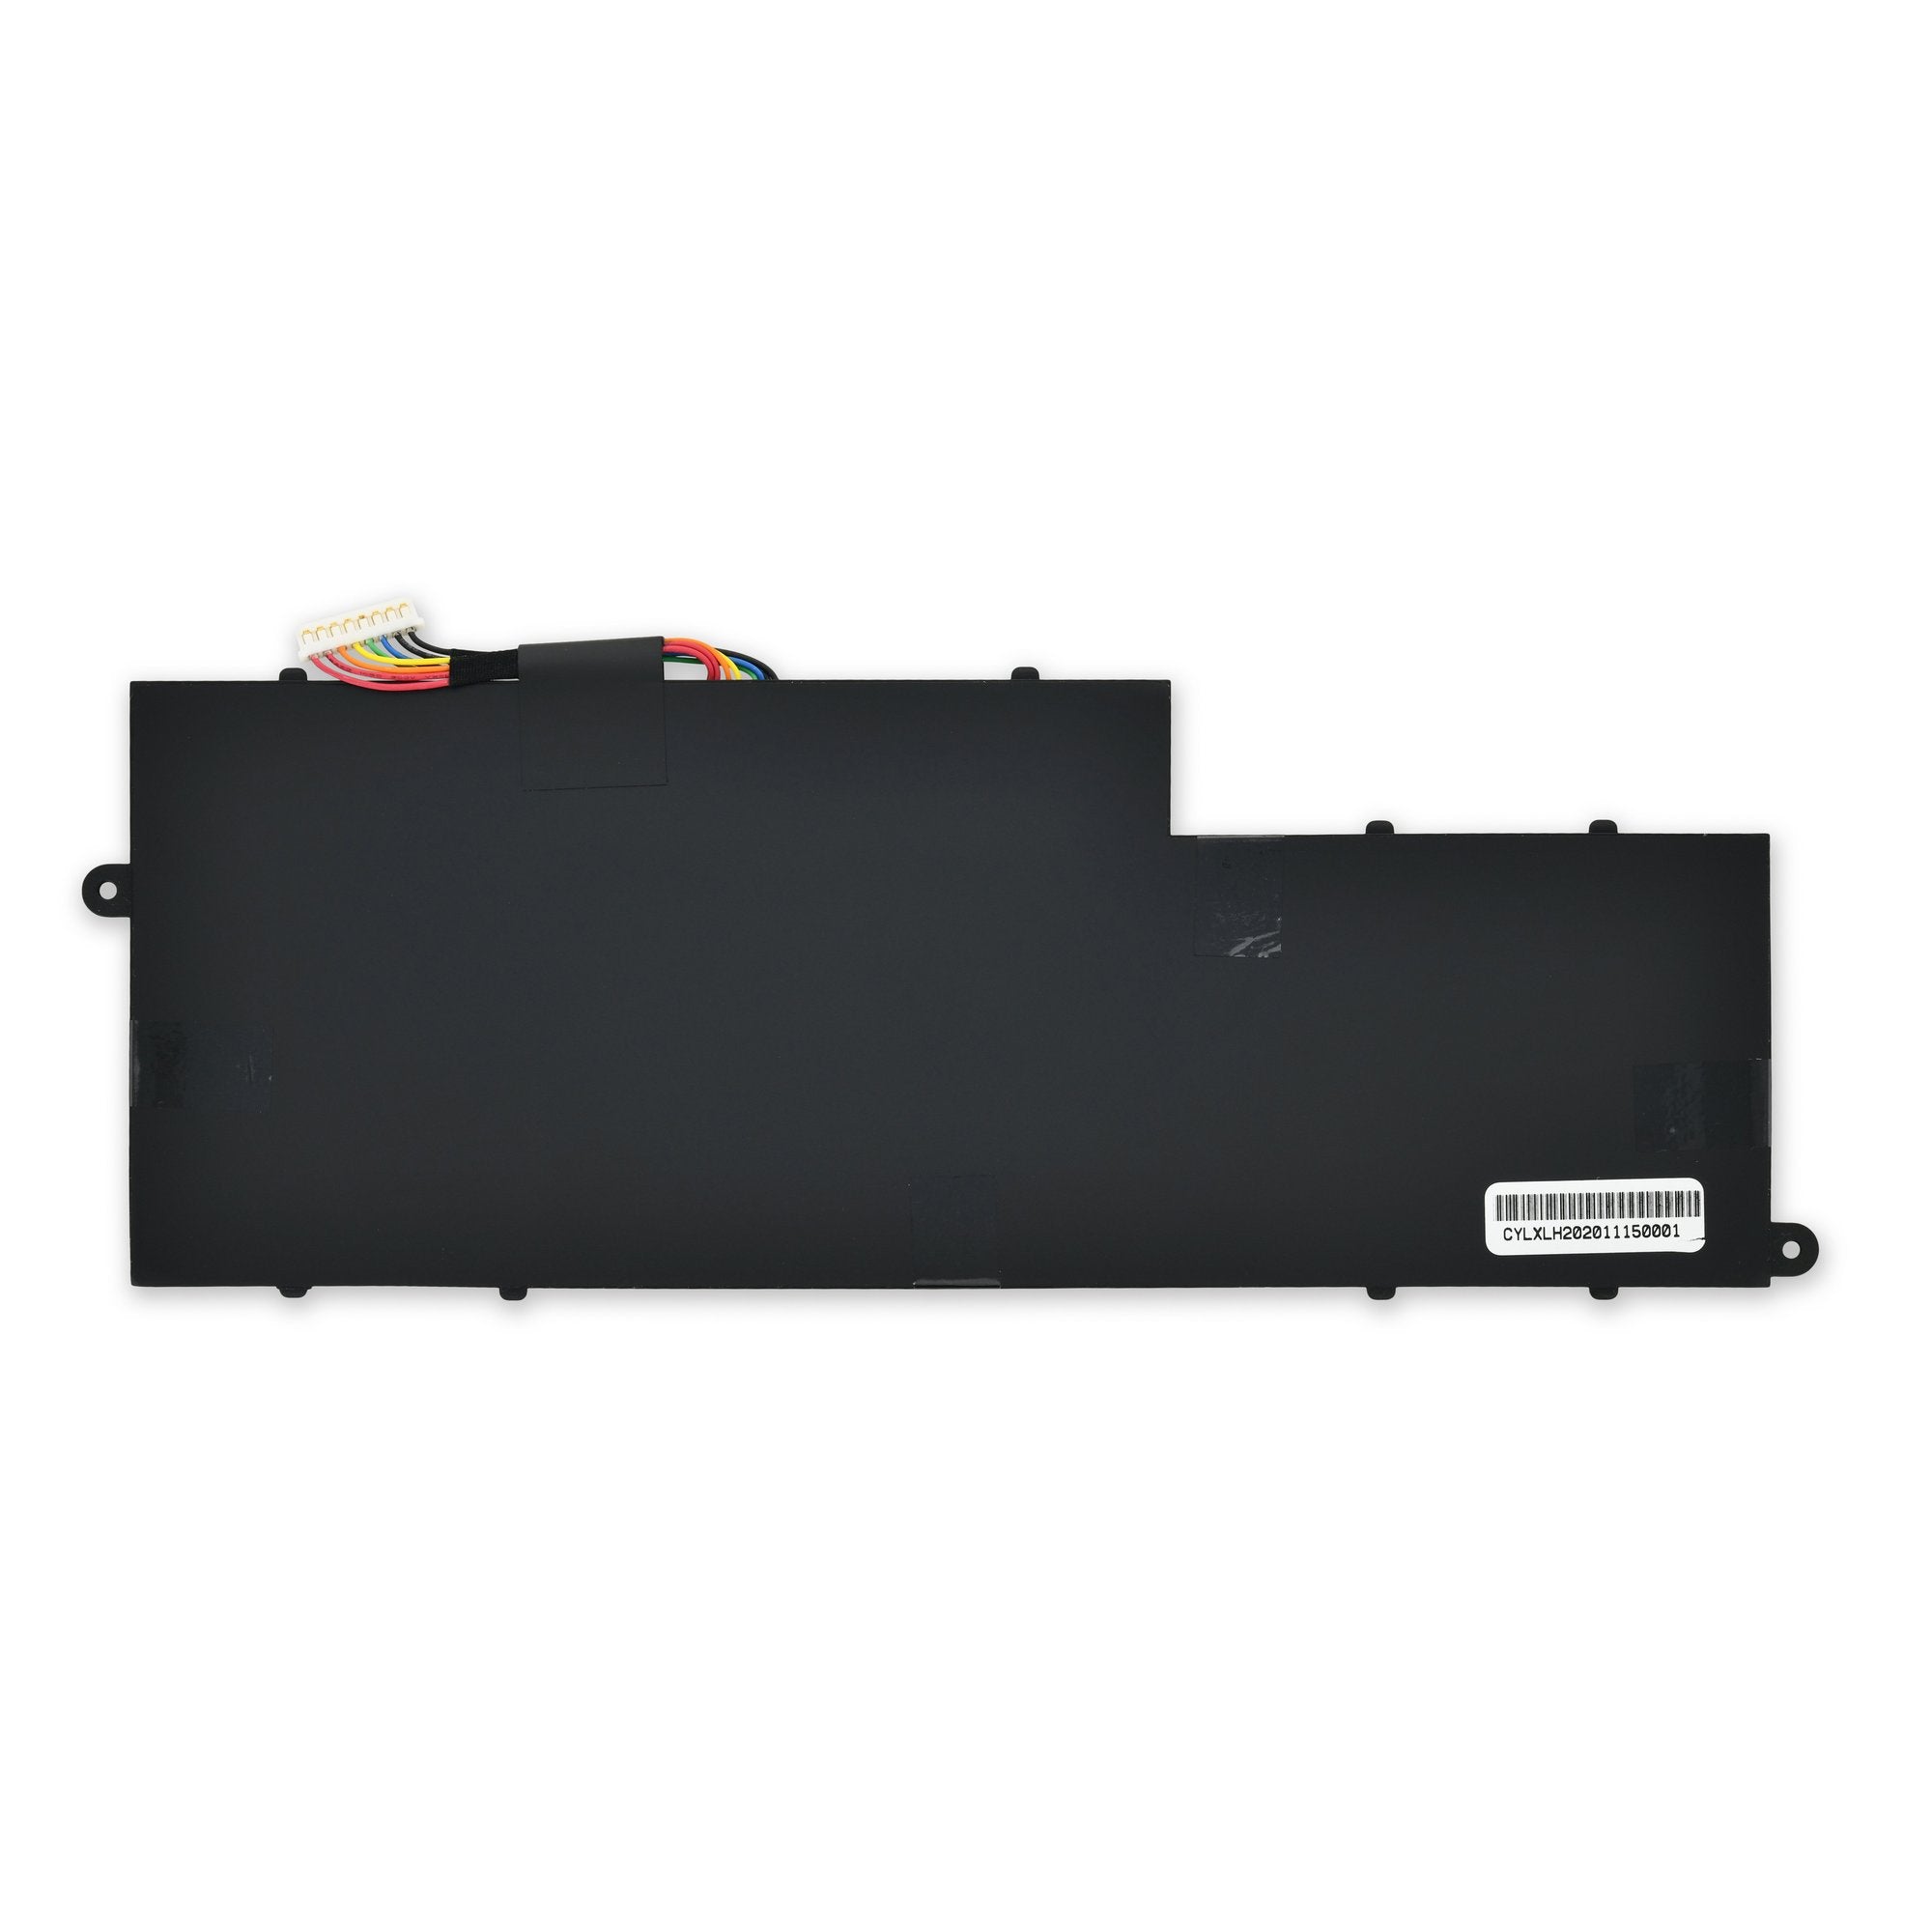 Acer AC13C34 Battery New Part Only